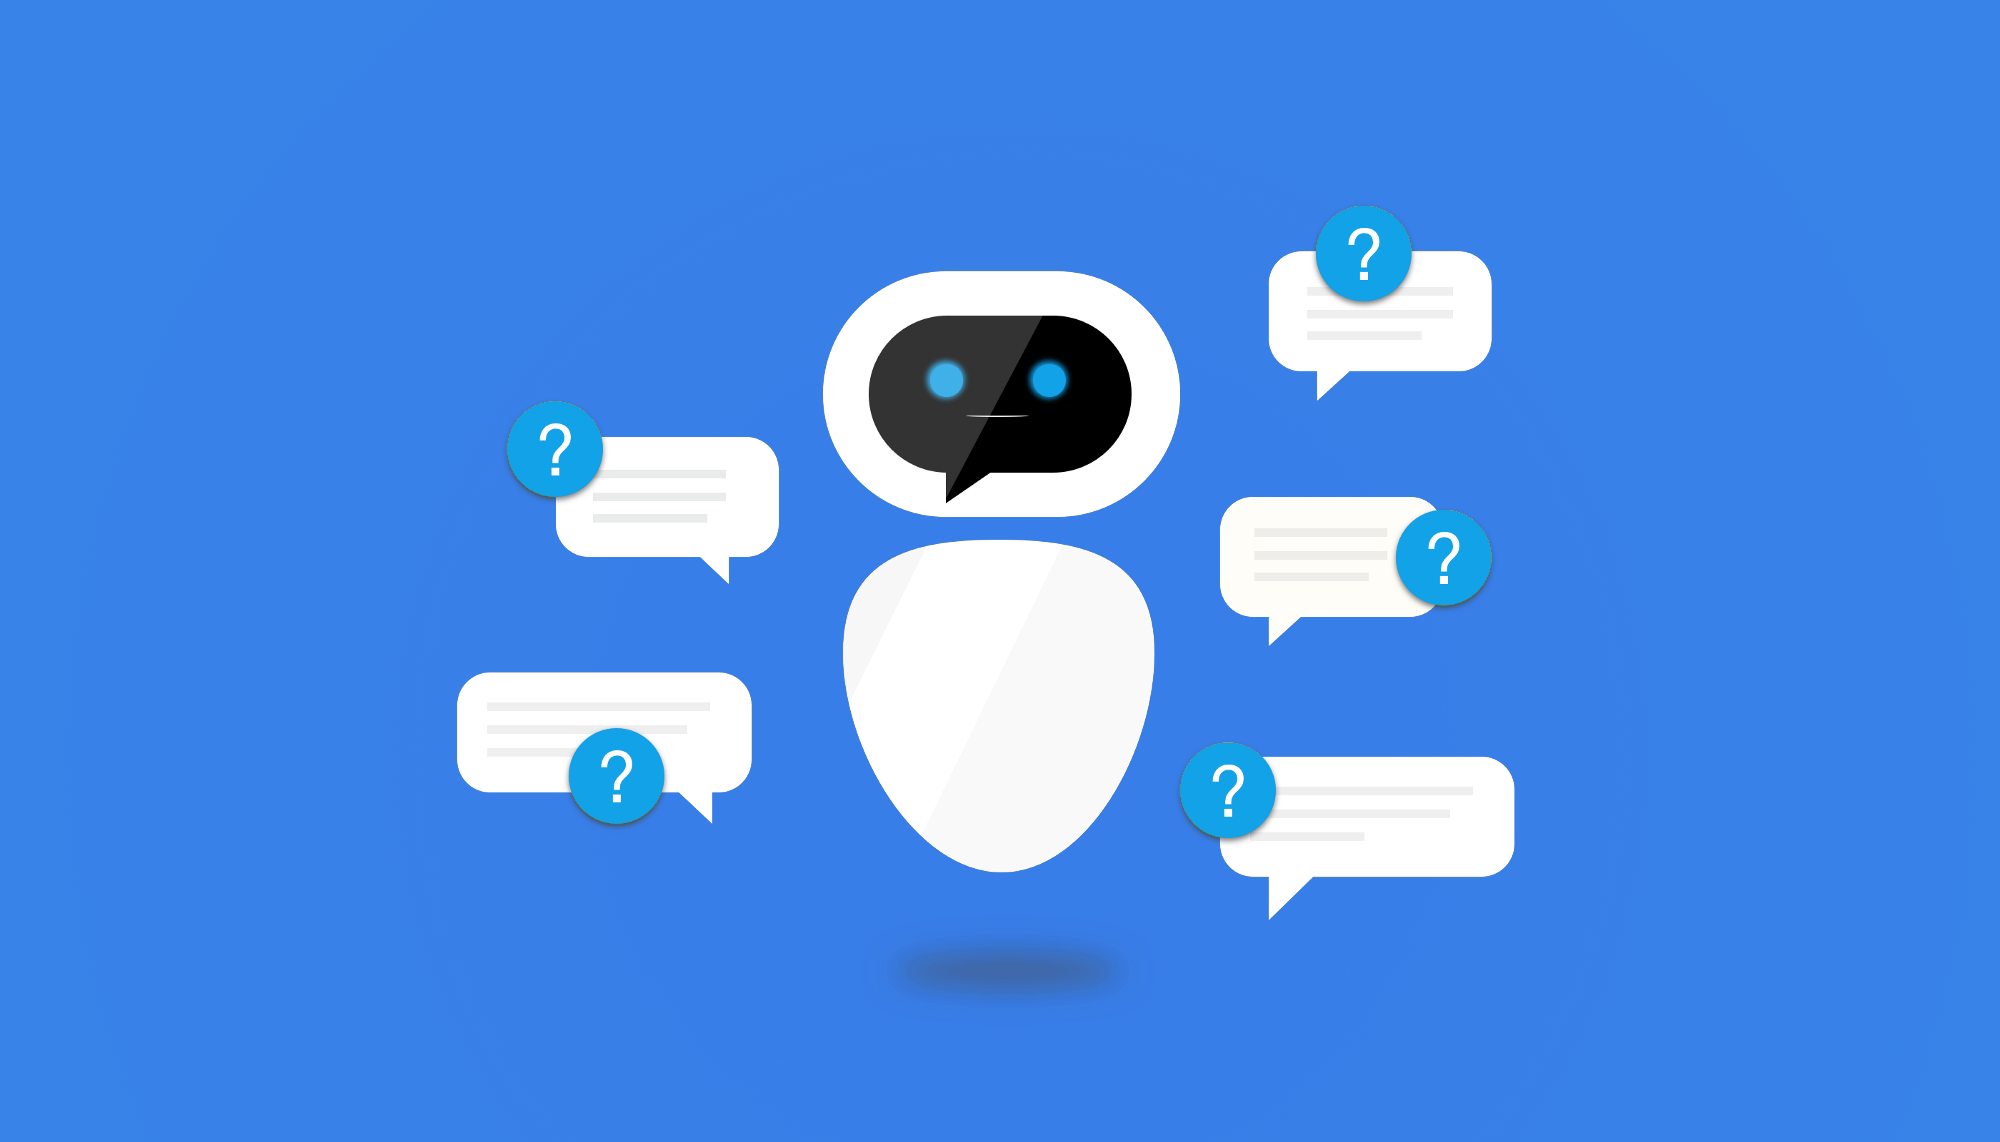 RealtimeCampaign.com Provides Information on the Incoming Chatbots Invasion